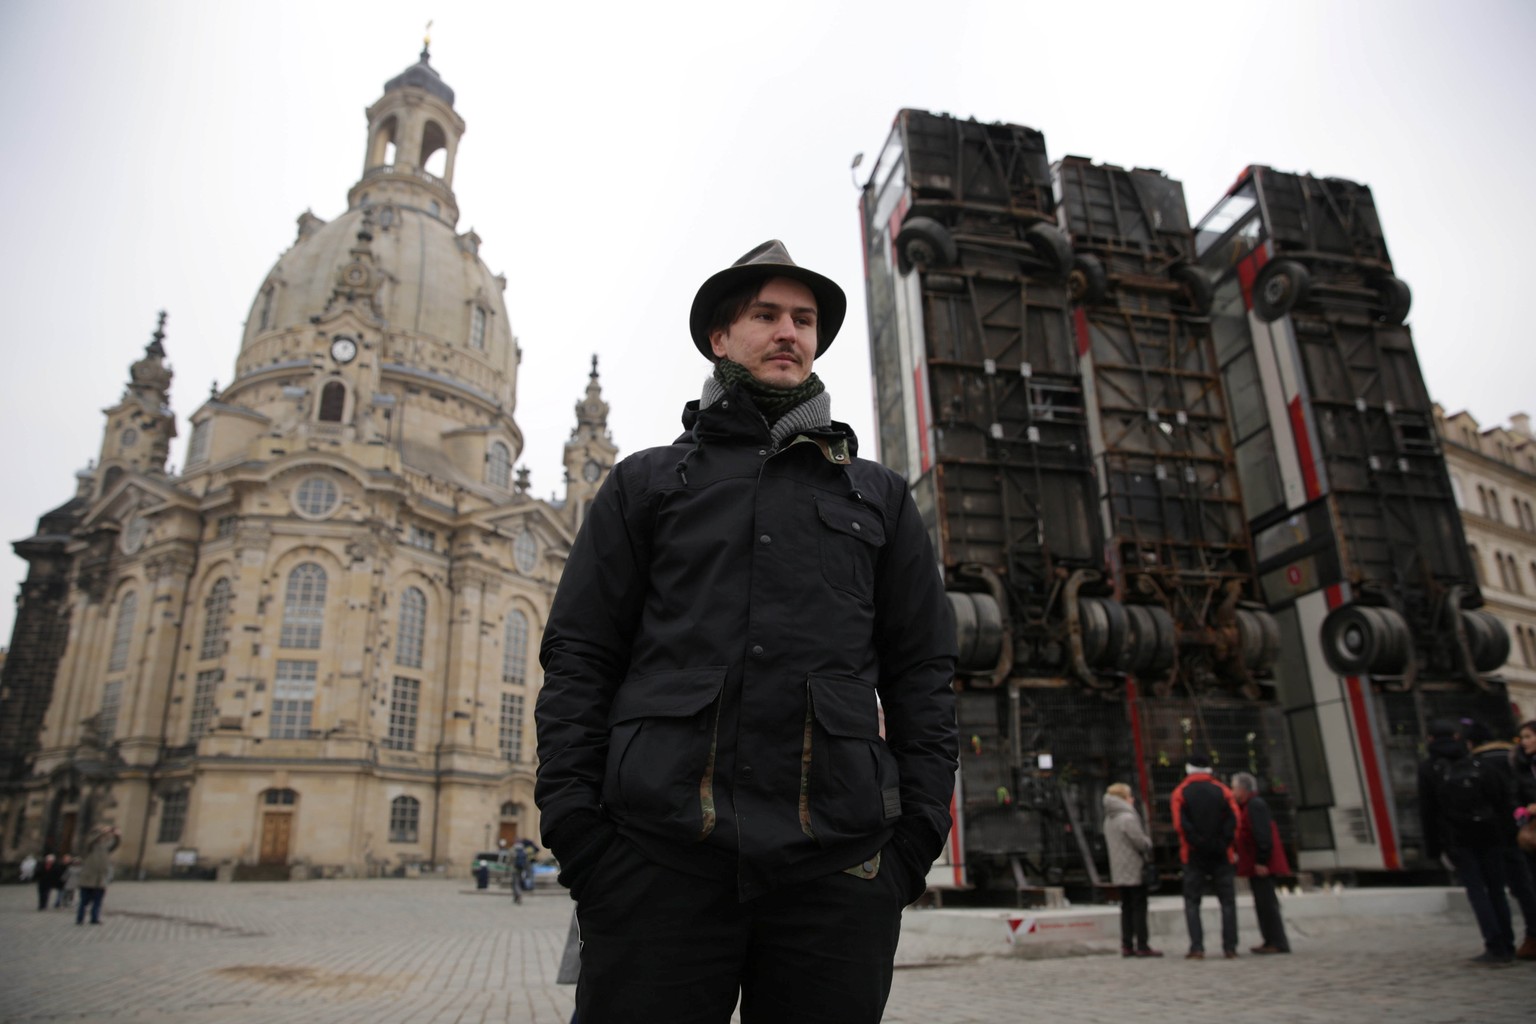 Syrian artist Manaf Halbouni stands next to his art instalation &quot;Monument&quot; made from three passenger busses near to the &#039;Frauenkirche&#039; church in Dresden, Germany February 8, 2017.  ...